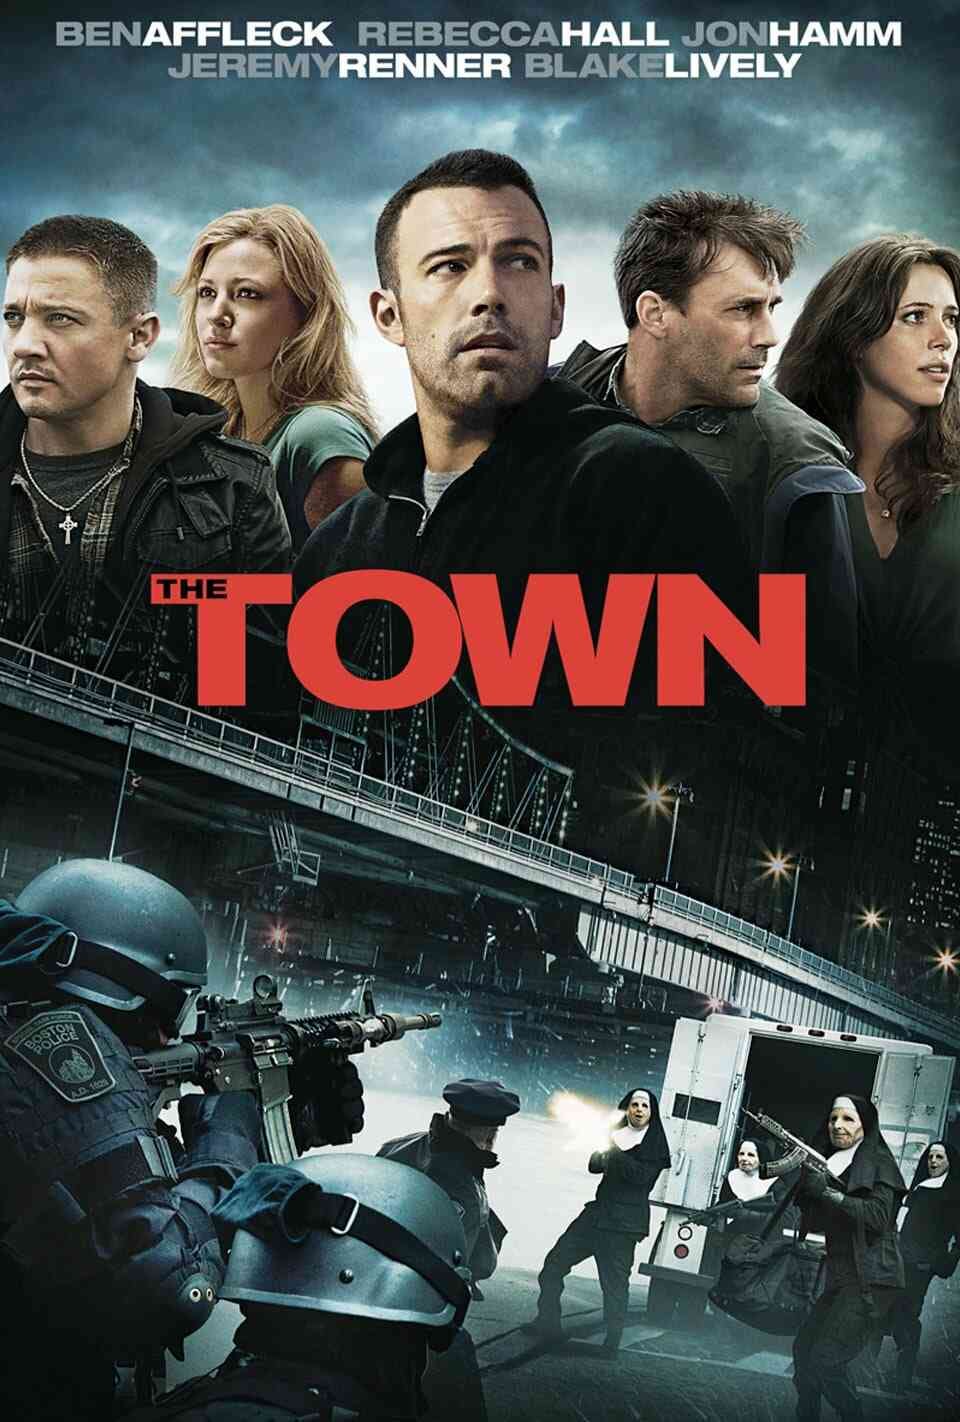 Read The Town screenplay.